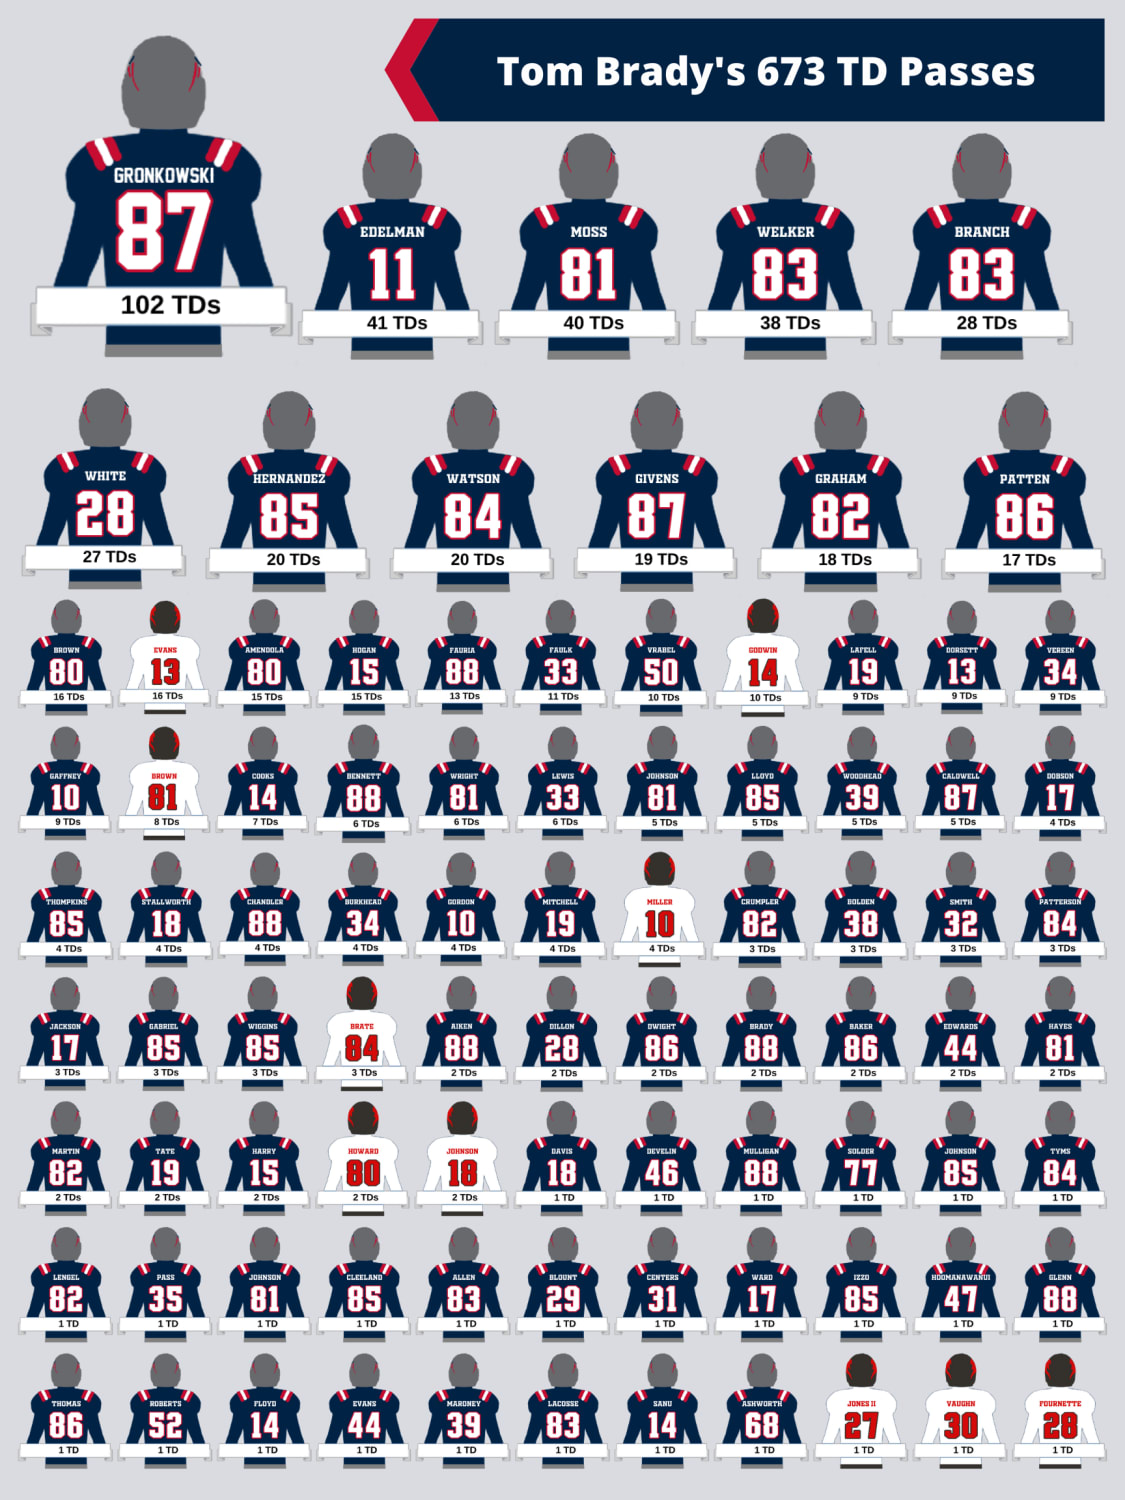 Tom Brady has thrown 102 TDs to Gronk. He's also thrown at least 1 TD to 87 other players. Here's what that looks like.